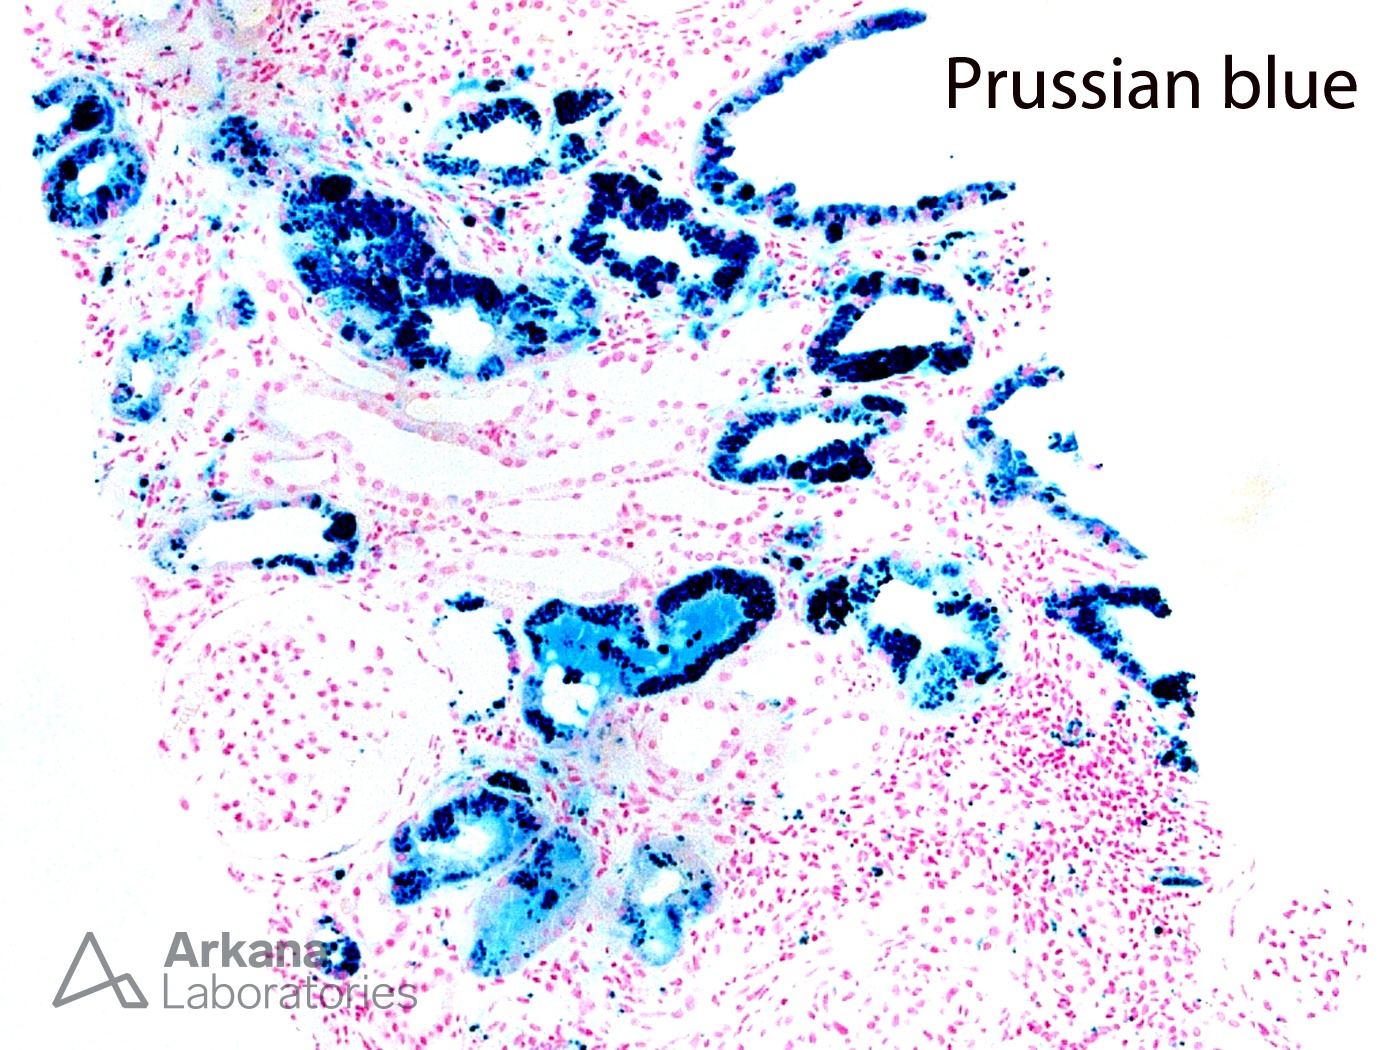 Prussian blue stain of renal cortex